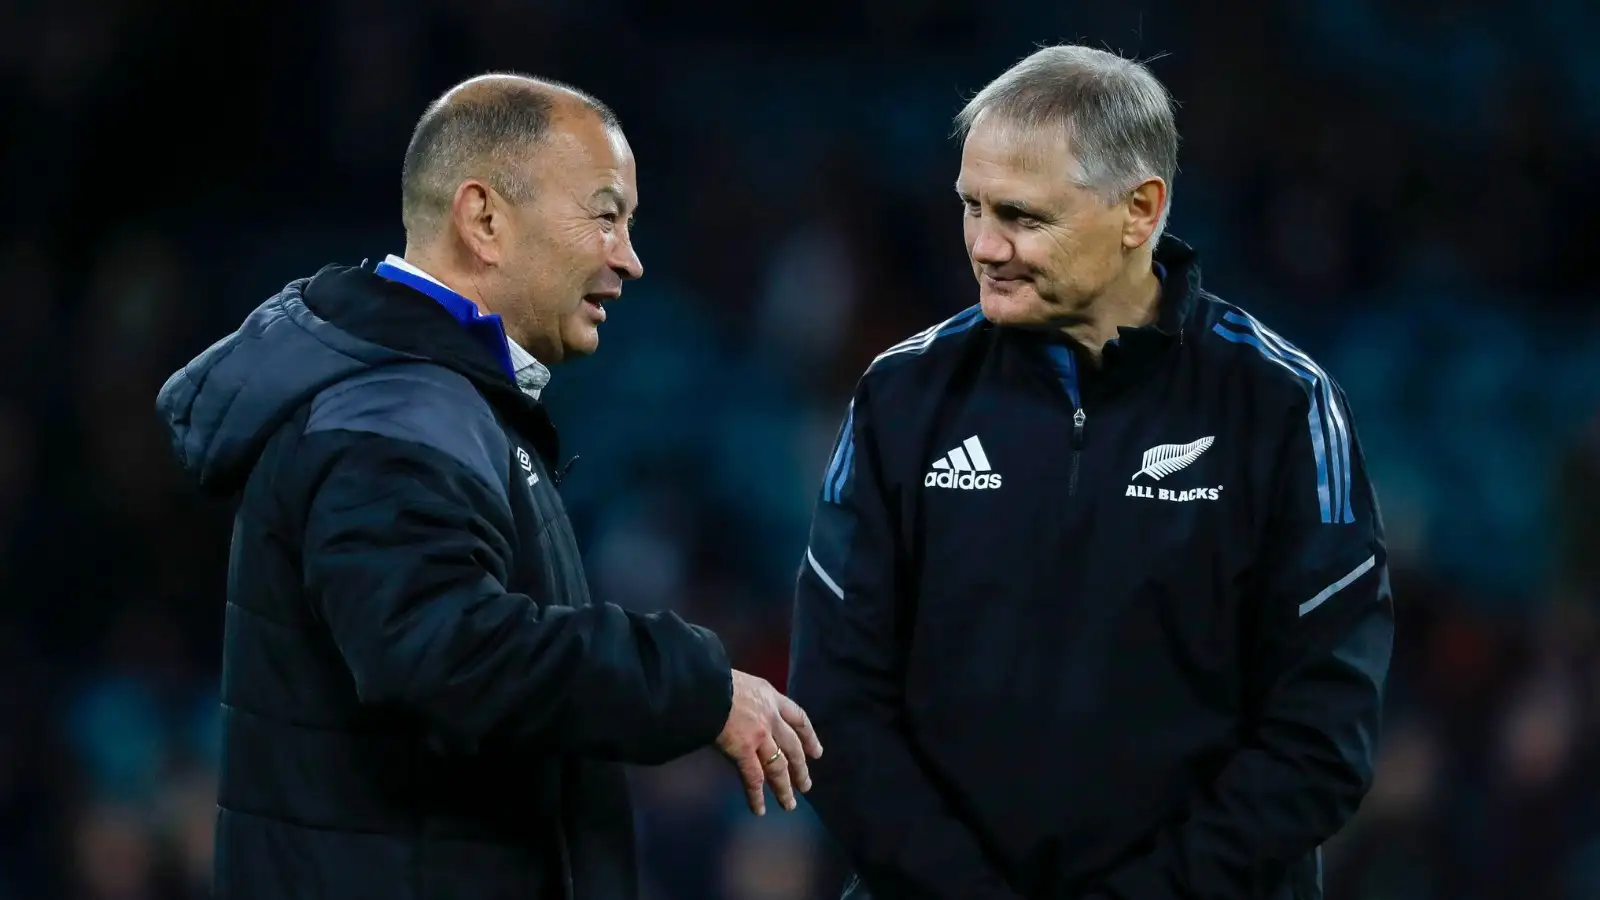 Former Ireland head coach Joe Schmidt has ruled himself out of the running to replace Ian Foster as the All Blacks coach after the 2023 Rugby World Cup scott robertson jamie joseph ian foster